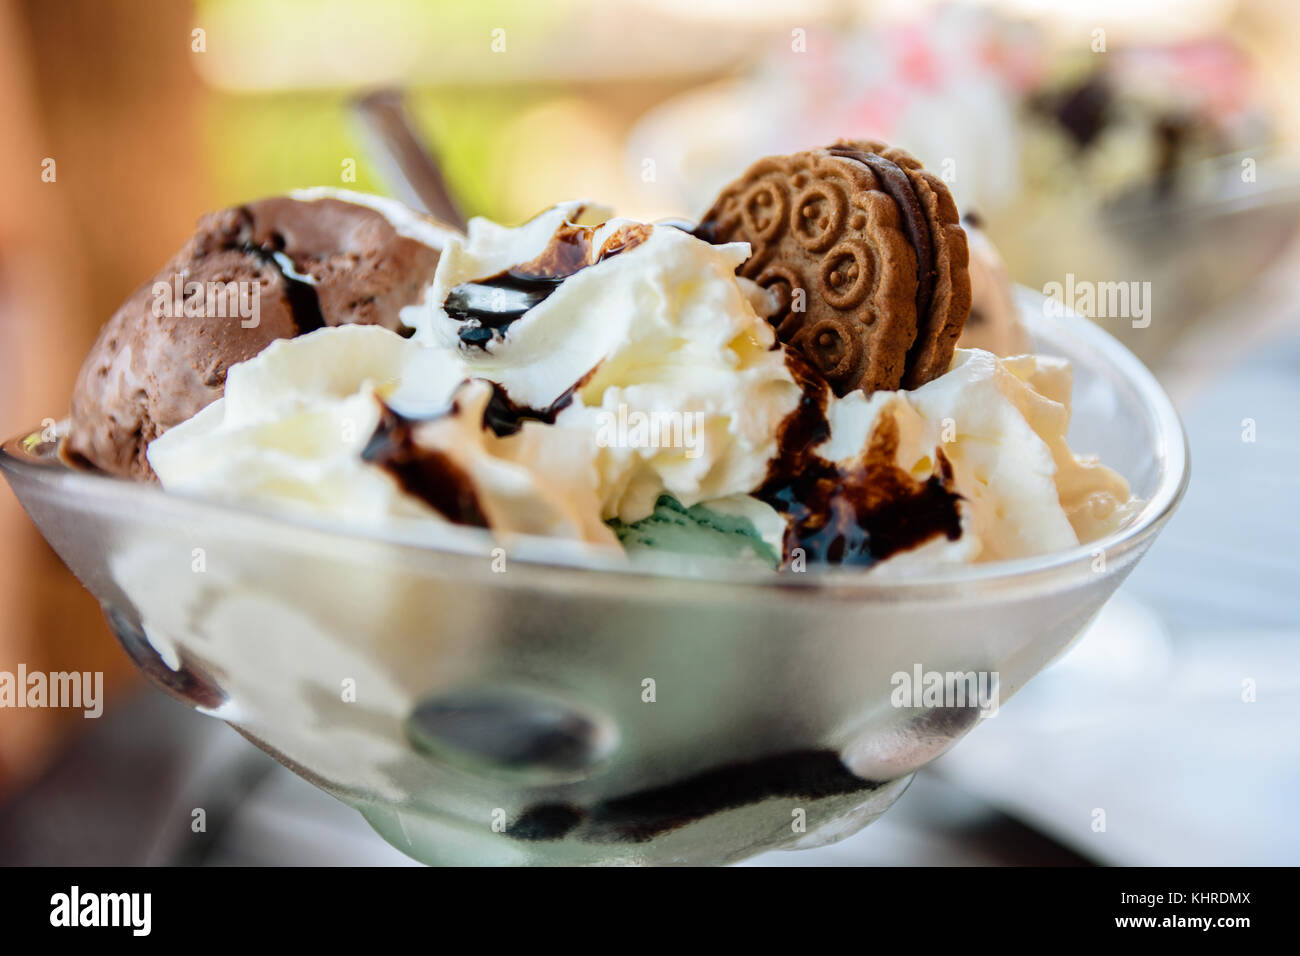 Mint And Chocolate Ice Cream Sundae With Sauce And Cookie In Glass Bowl Stock Photo